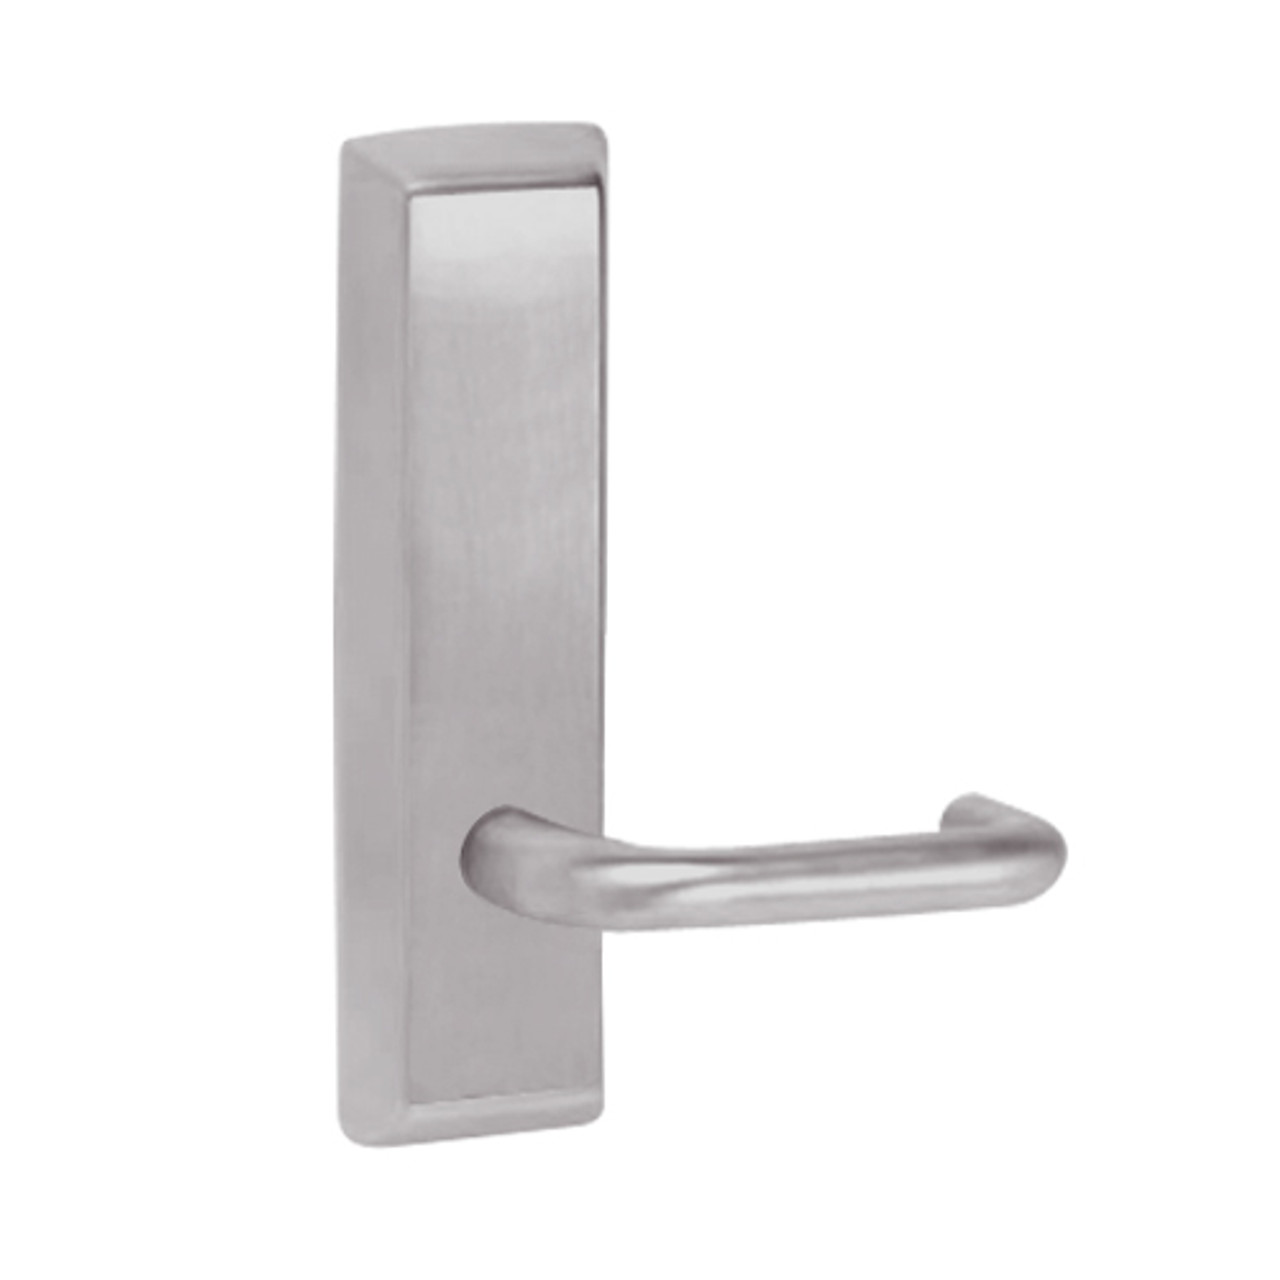 L955-630-LHR Corbin ED5000 Series Exit Device Trim with Classroom Lustra Lever in Satin Stainless Steel Finish